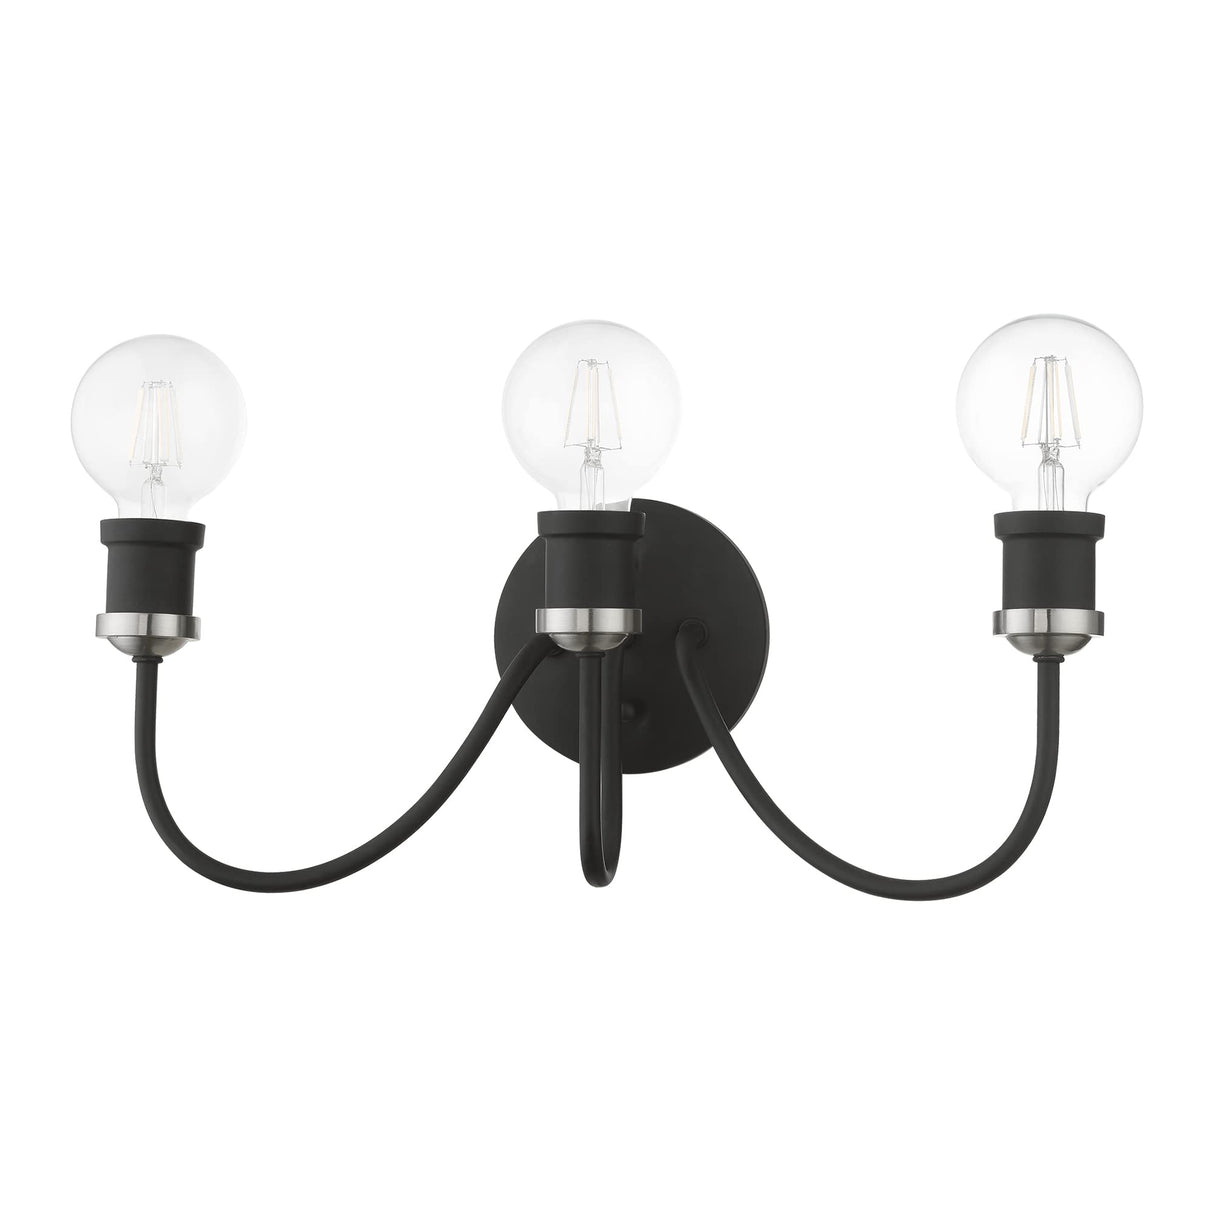 Livex Lighting 16573-04 Lansdale 3 Light Vanity Sconce, Black with Brushed Nickel Accent